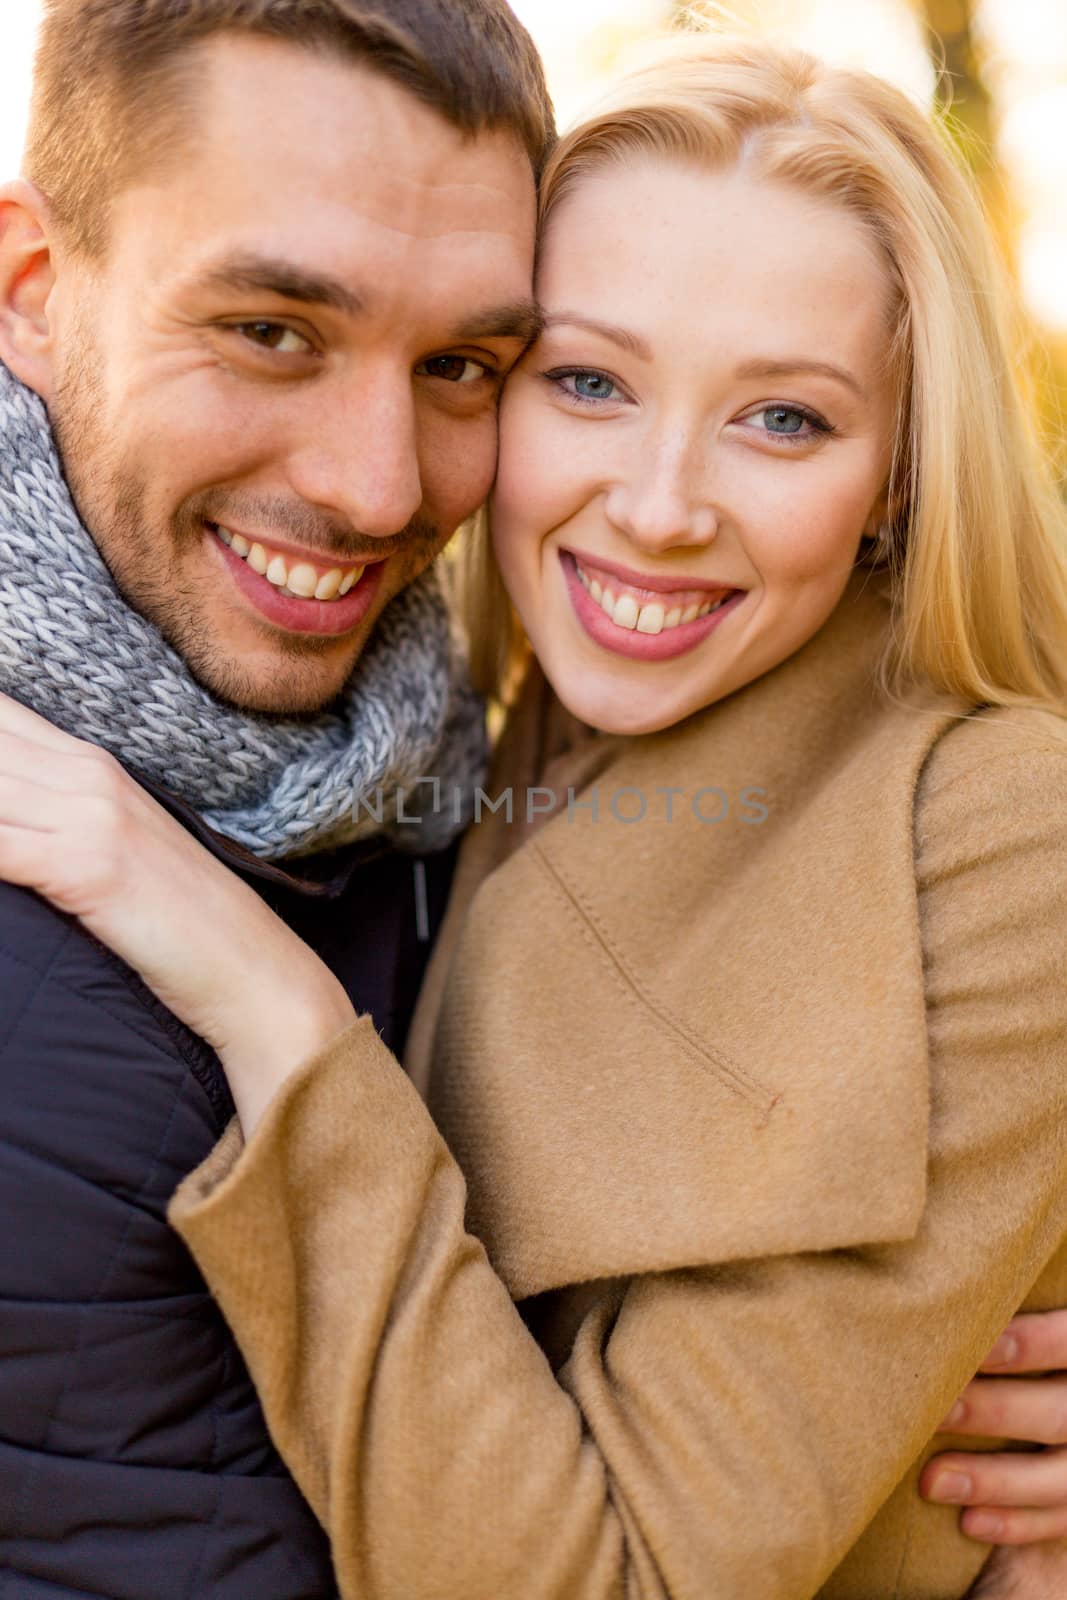 smiling couple hugging in autumn park by dolgachov